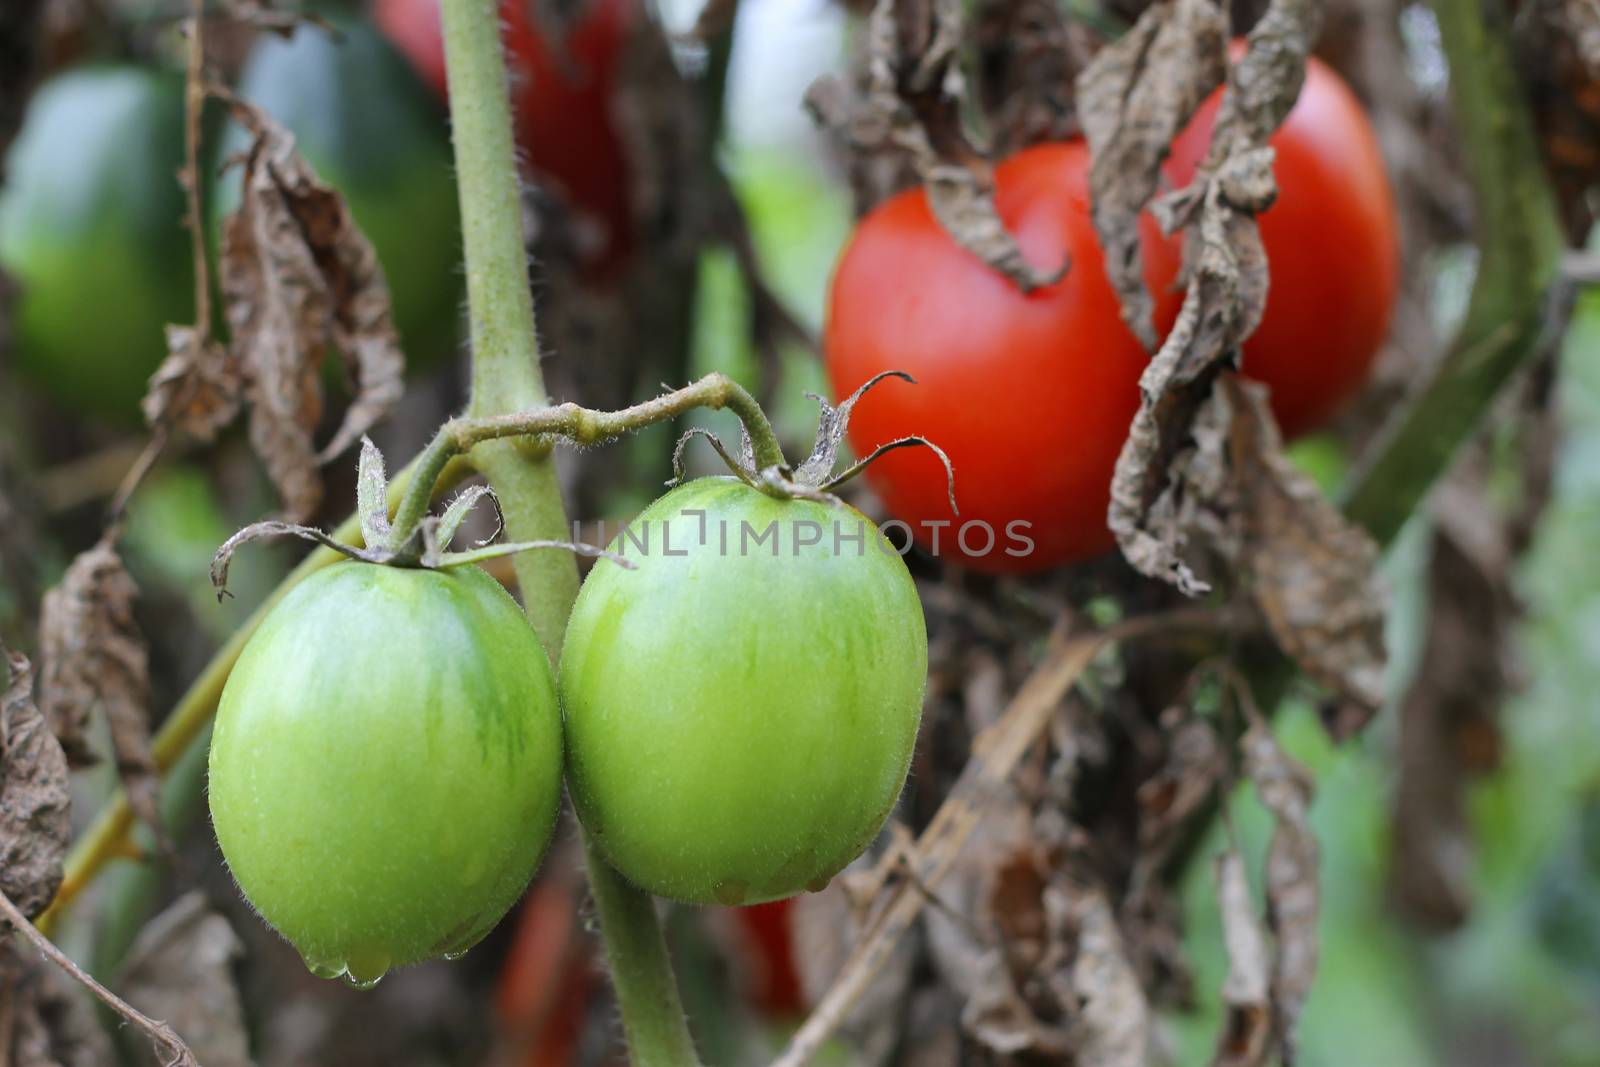 Bush of green tomato in the garden by scullery